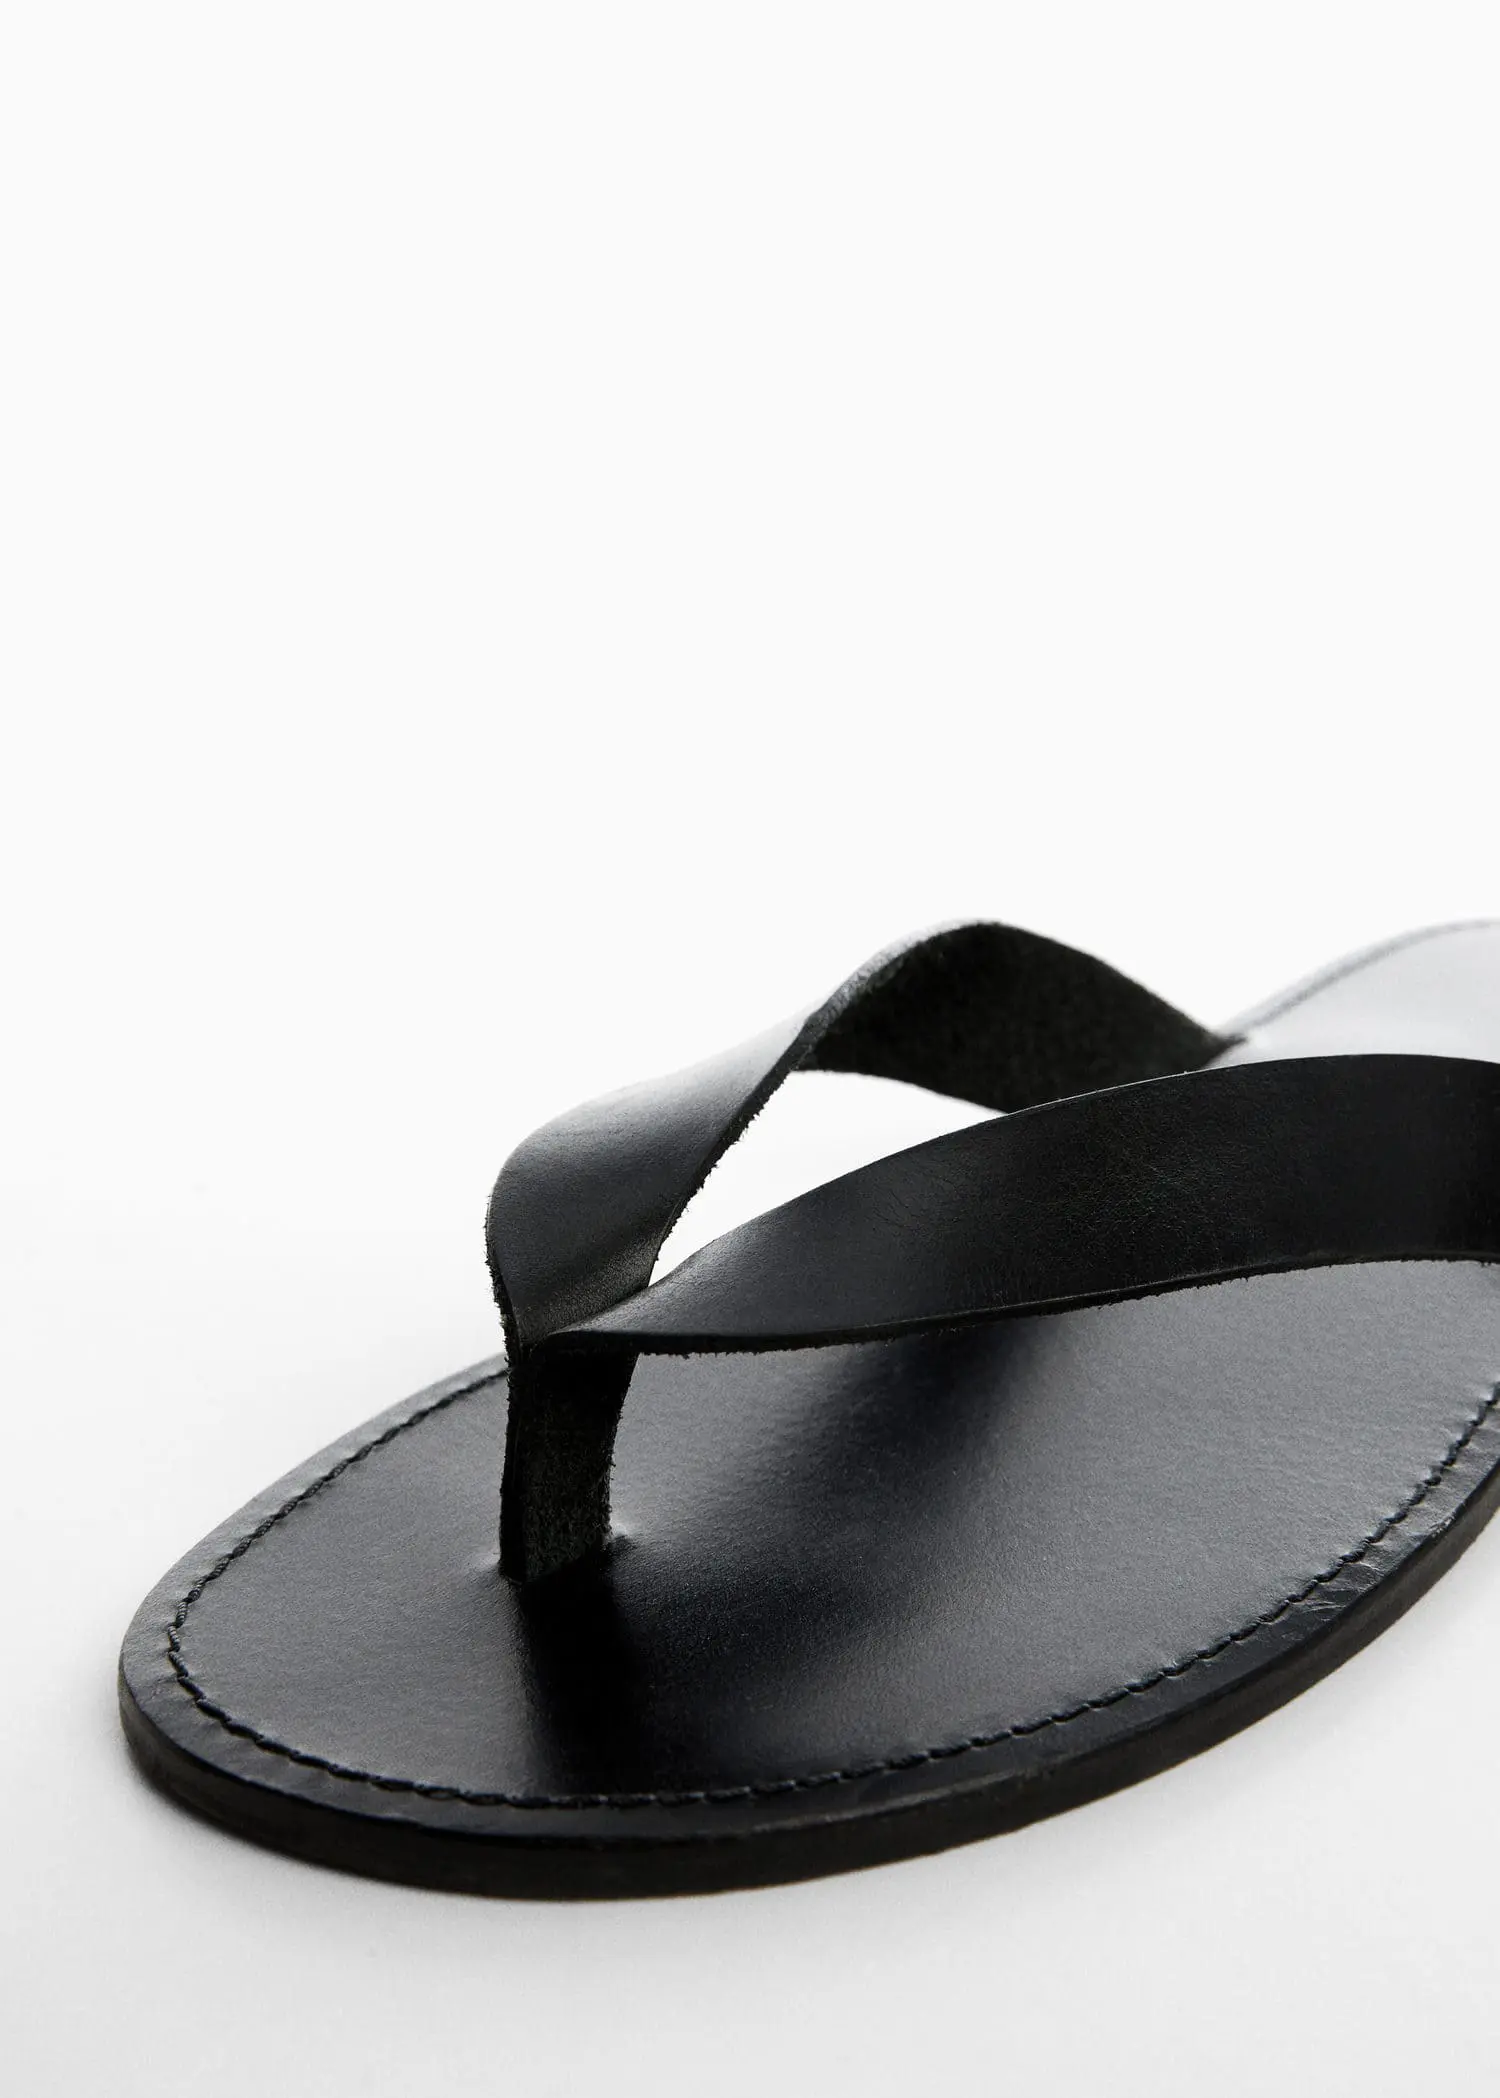 Mango Leather straps sandals. a pair of flip flops sitting on top of a white surface. 